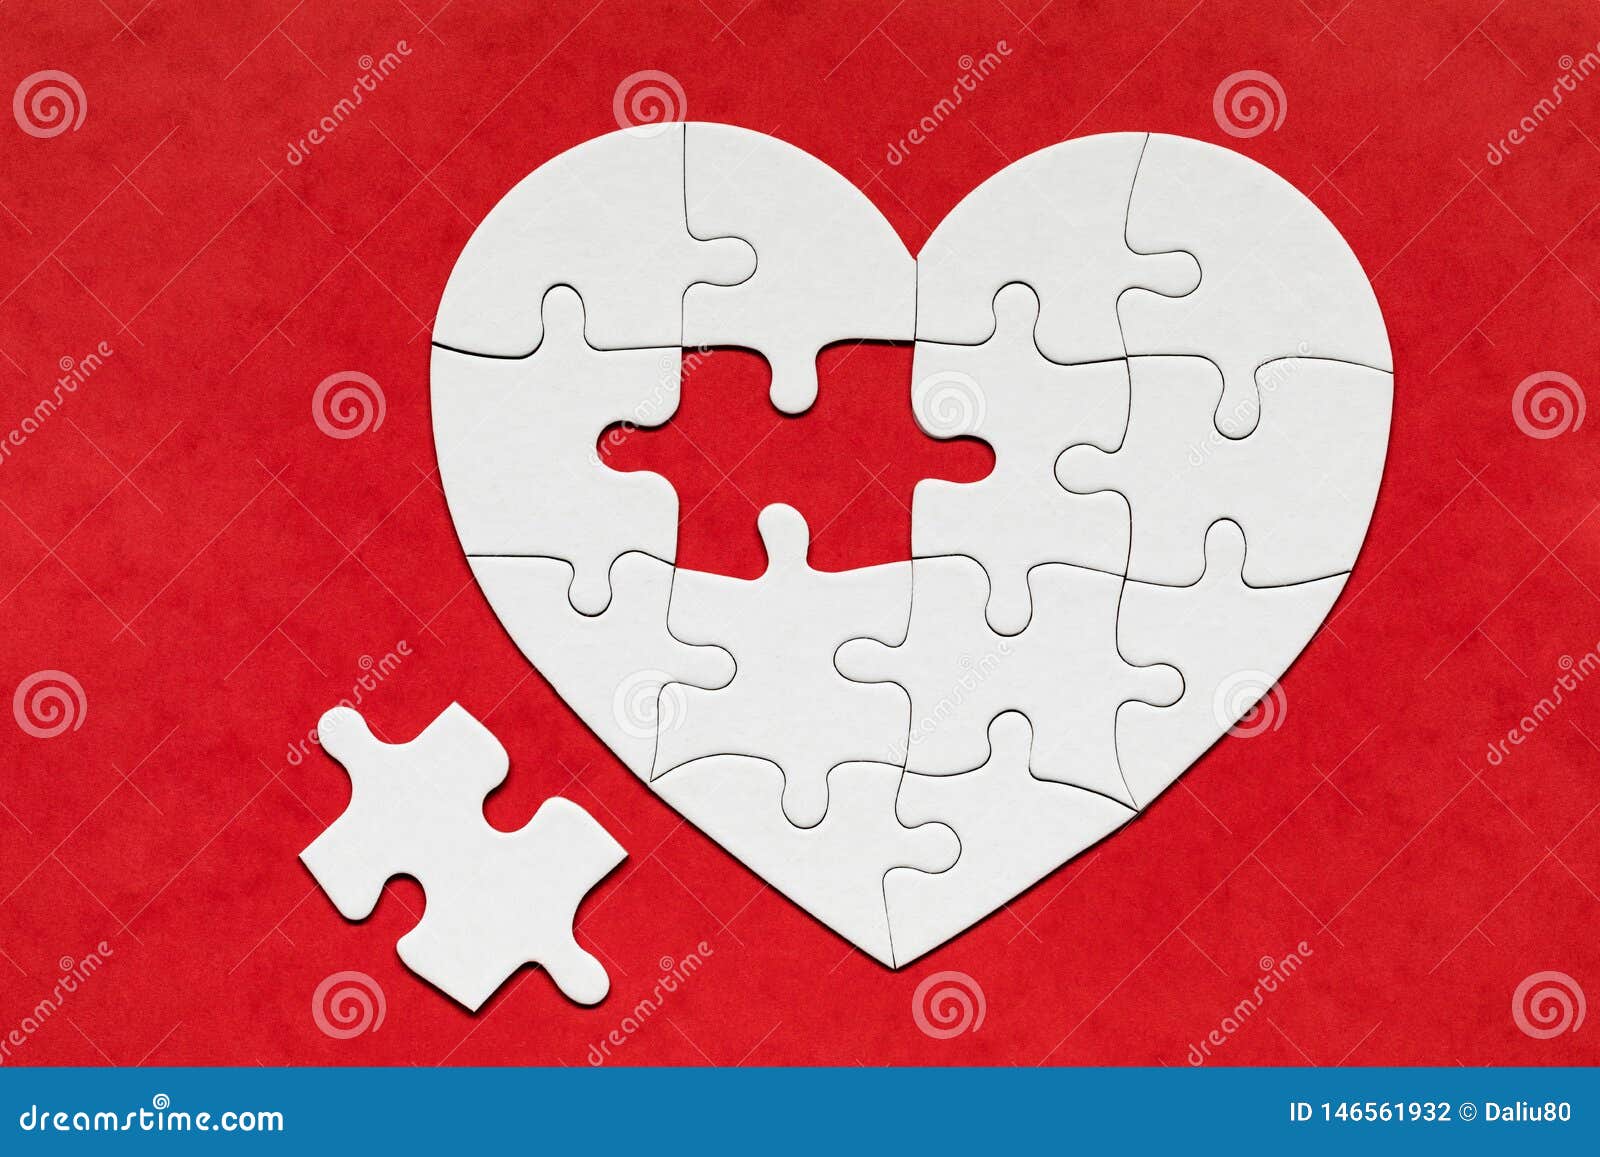 2 x Heart Stickers 10 cm Colourful Jigsaw Puzzle Effect  #44666 